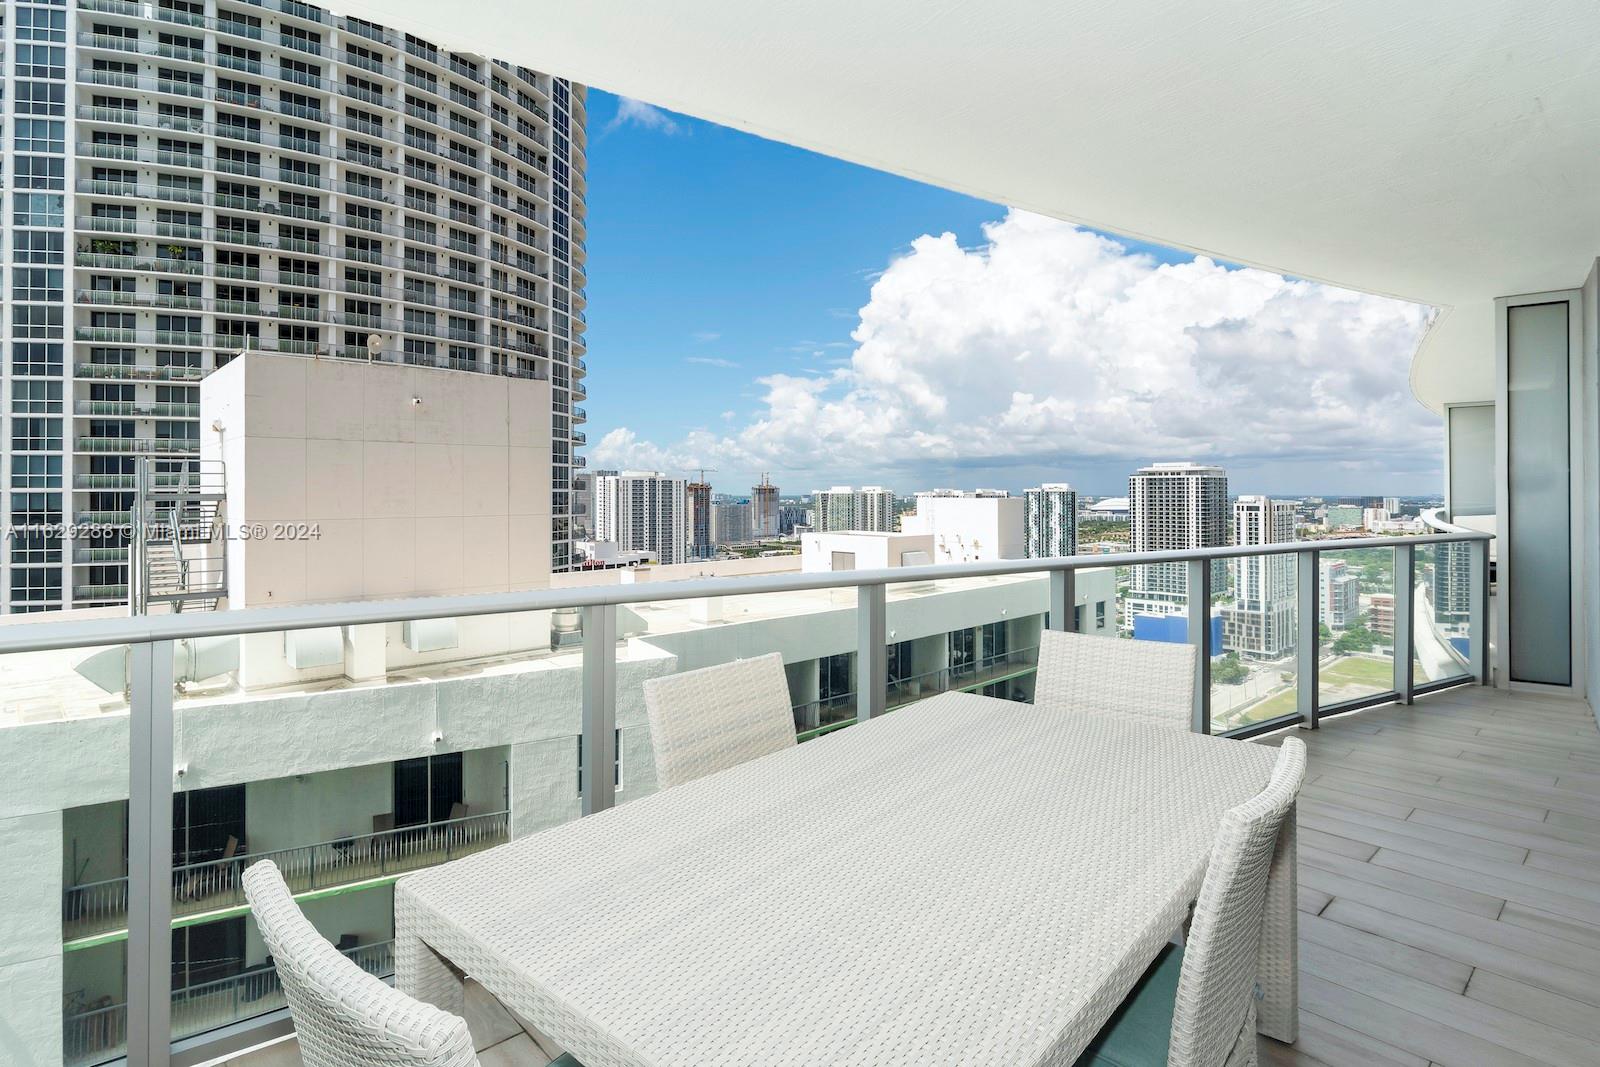 This exquisite furnished unit features a private elevator, 1 bedroom + den (can be converted to a second bedroom), and 2 full bathrooms. Stunning views of Biscayne Bay. Beautiful kitchen with stainless steel appliances. Enjoy 3 floors of unparalleled amenities: 2 pools (one with stunning Biscayne Bay views and another with breathtaking city sunsets), a yoga studio, game room, spa, gym, massage areas, lounge, movie theater, 24-hour doorman, business lounge, and kids play area. Includes 1 assigned parking space and valet parking. Located in the heart of Miami, this is your dream home come true.